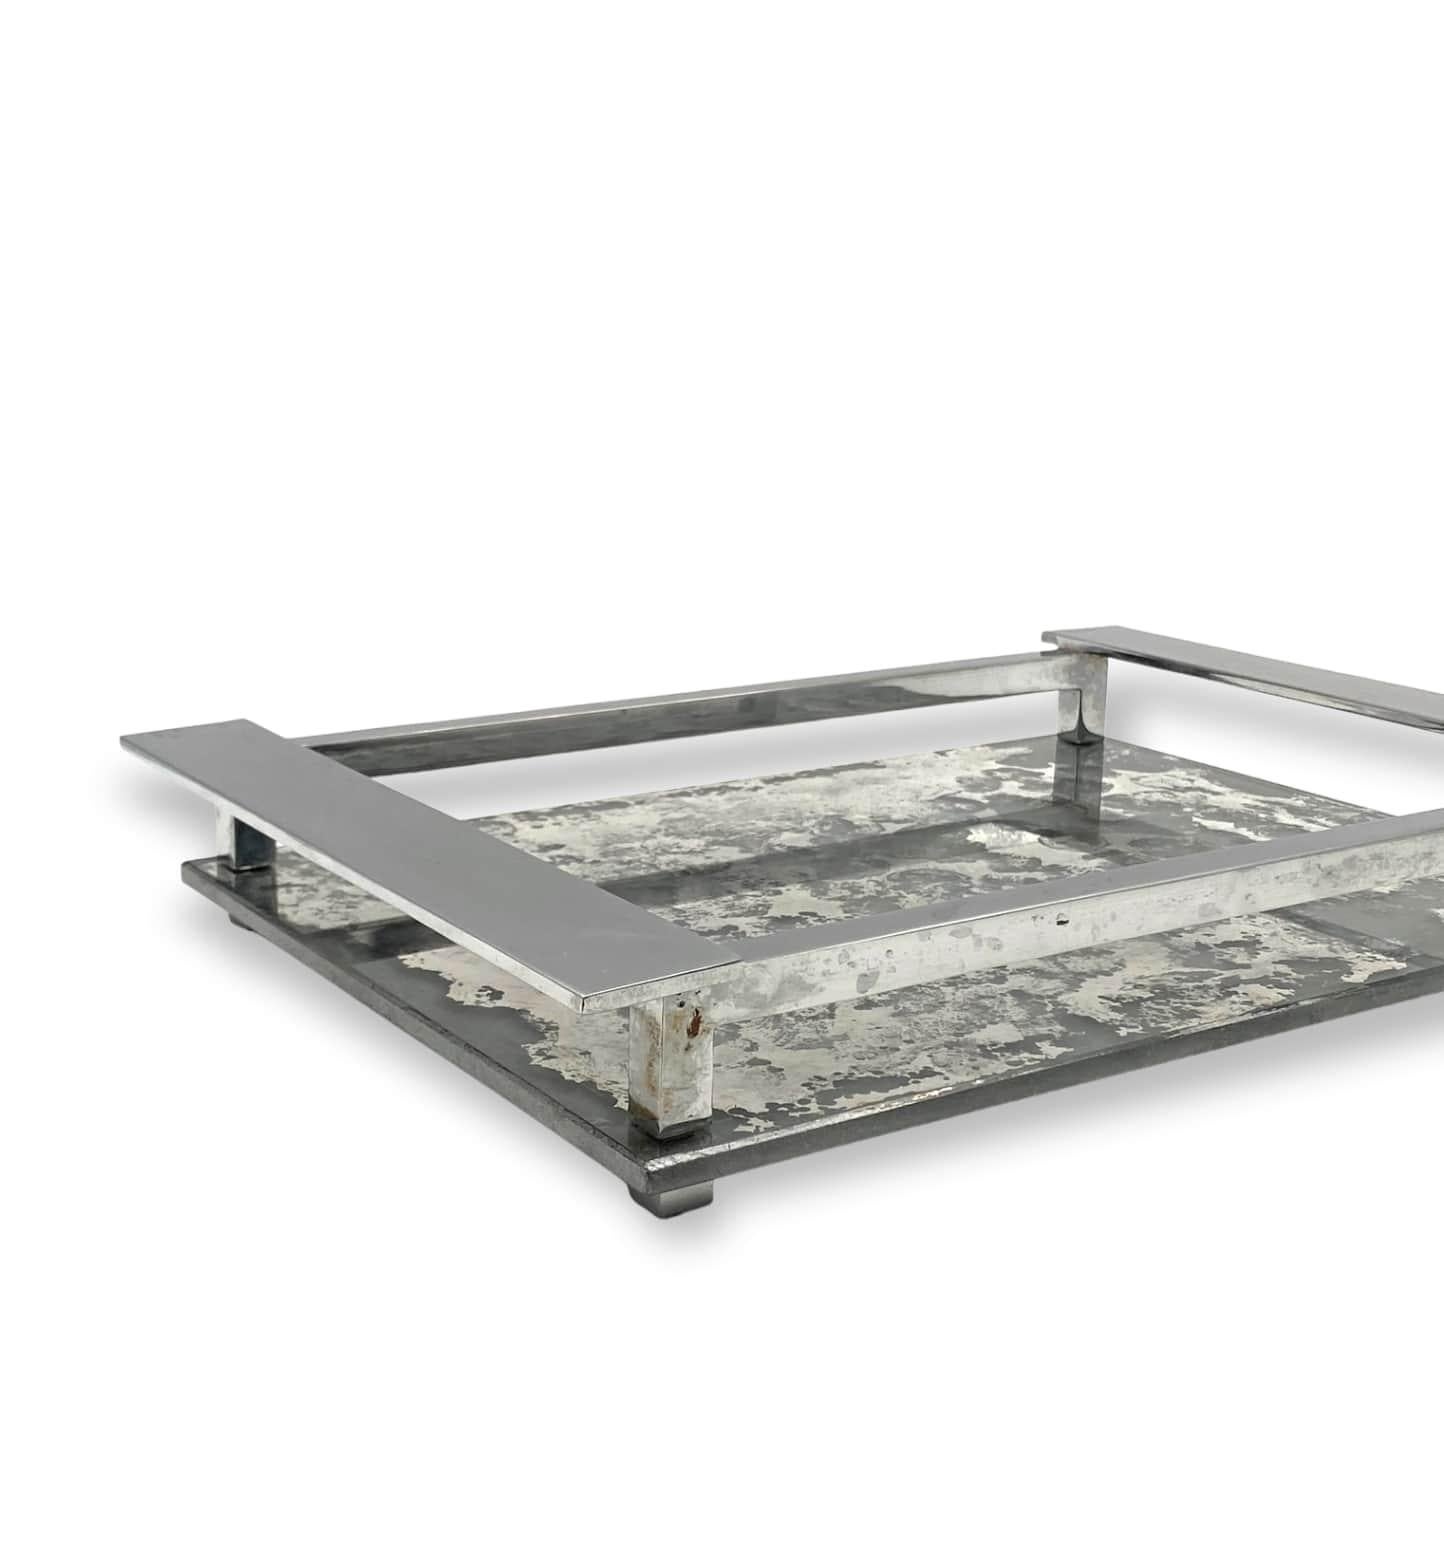 Jacques Adnet, Modernist Cubist Mirrored Tray, France, 1940s / 1950s For Sale 3